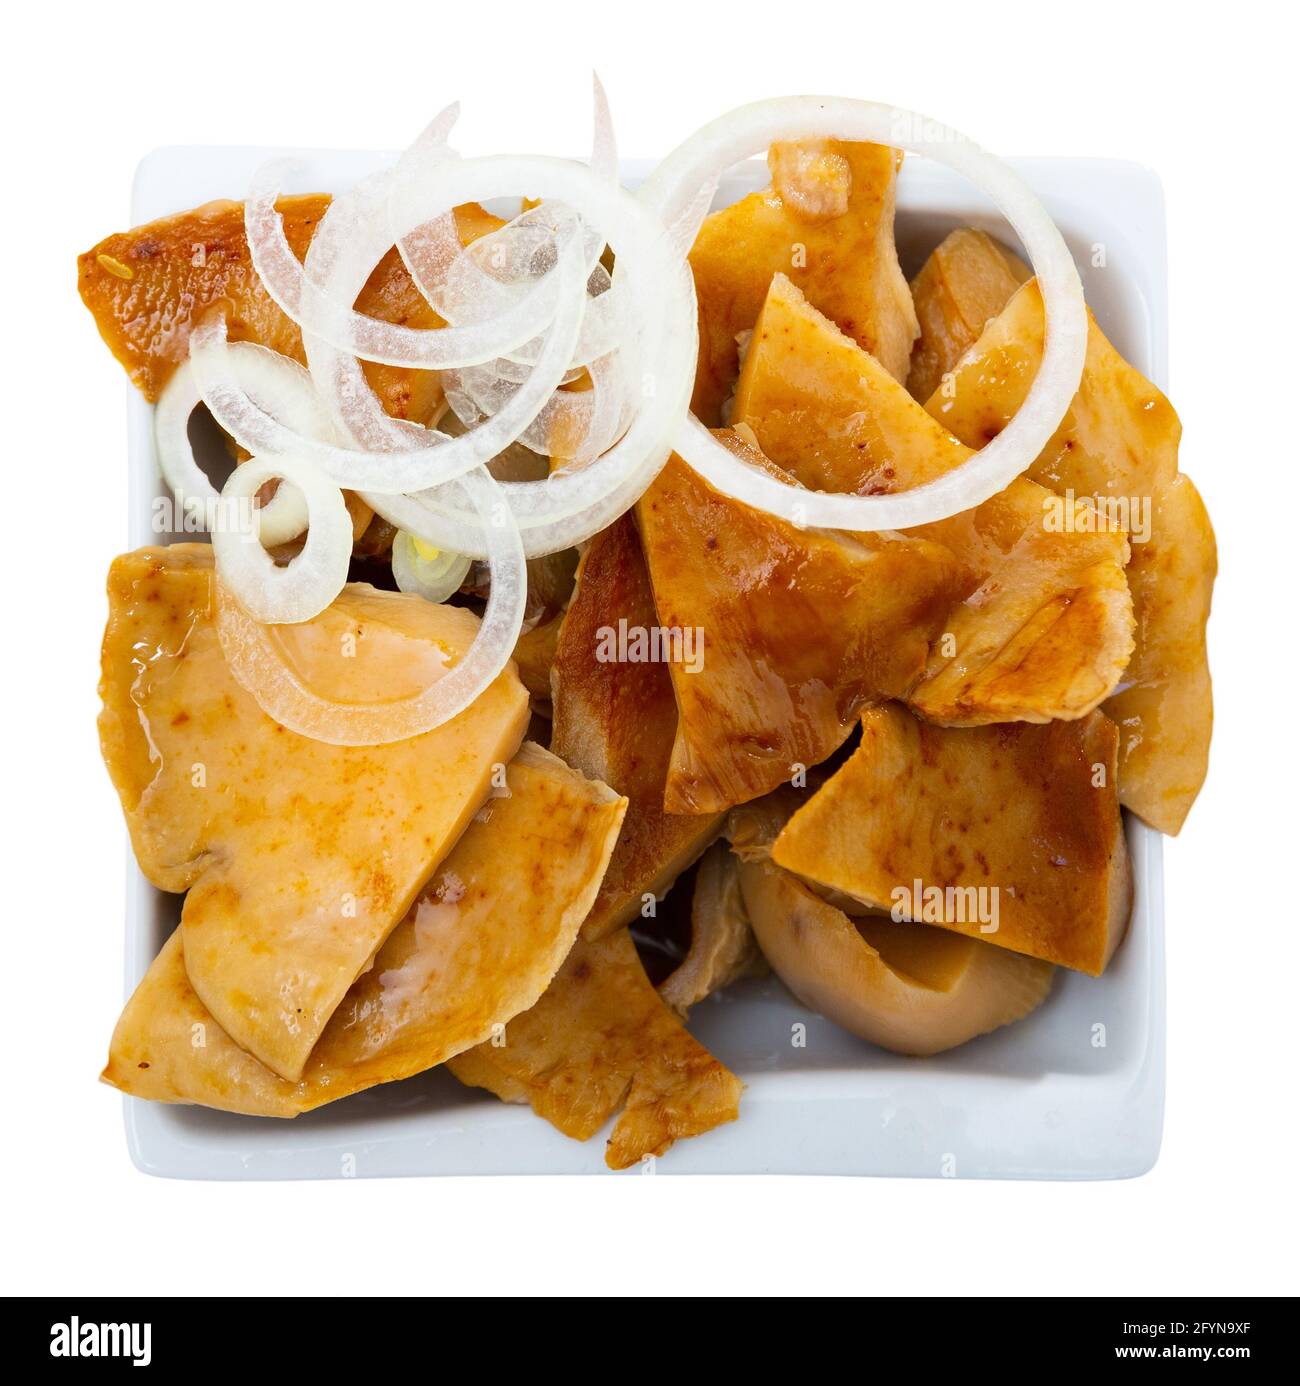 Salad bowl with pickled brittlegills (Russula delica) and thin sliced white onions. Delicious homemade pickles. Isolated over white background Stock Photo